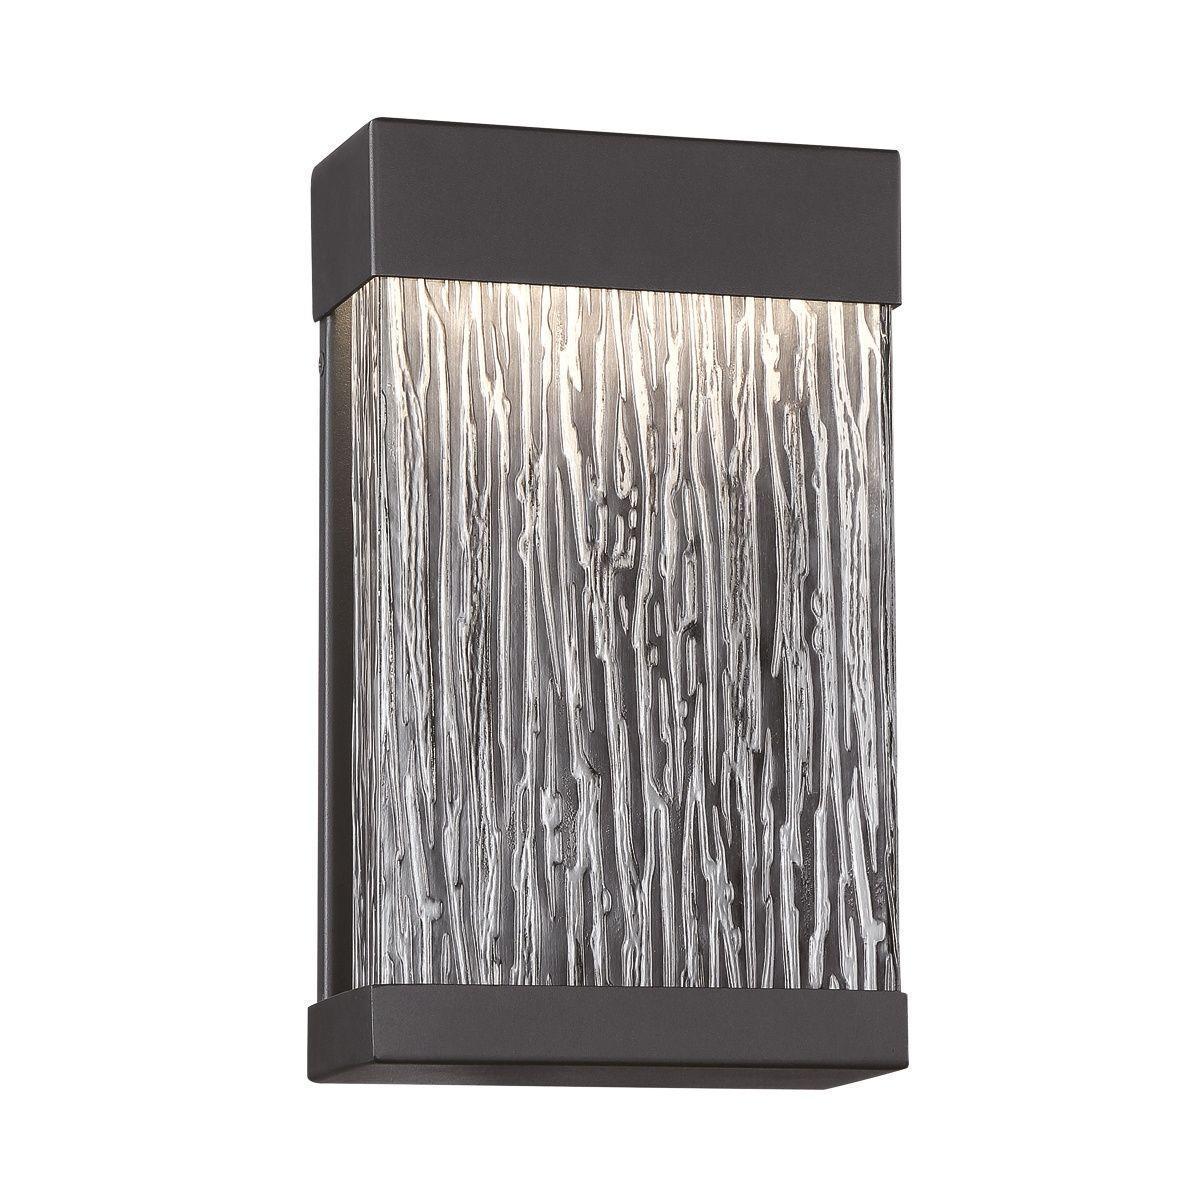 35891 11 In. LED Outdoor Wall Sconce Black Finish